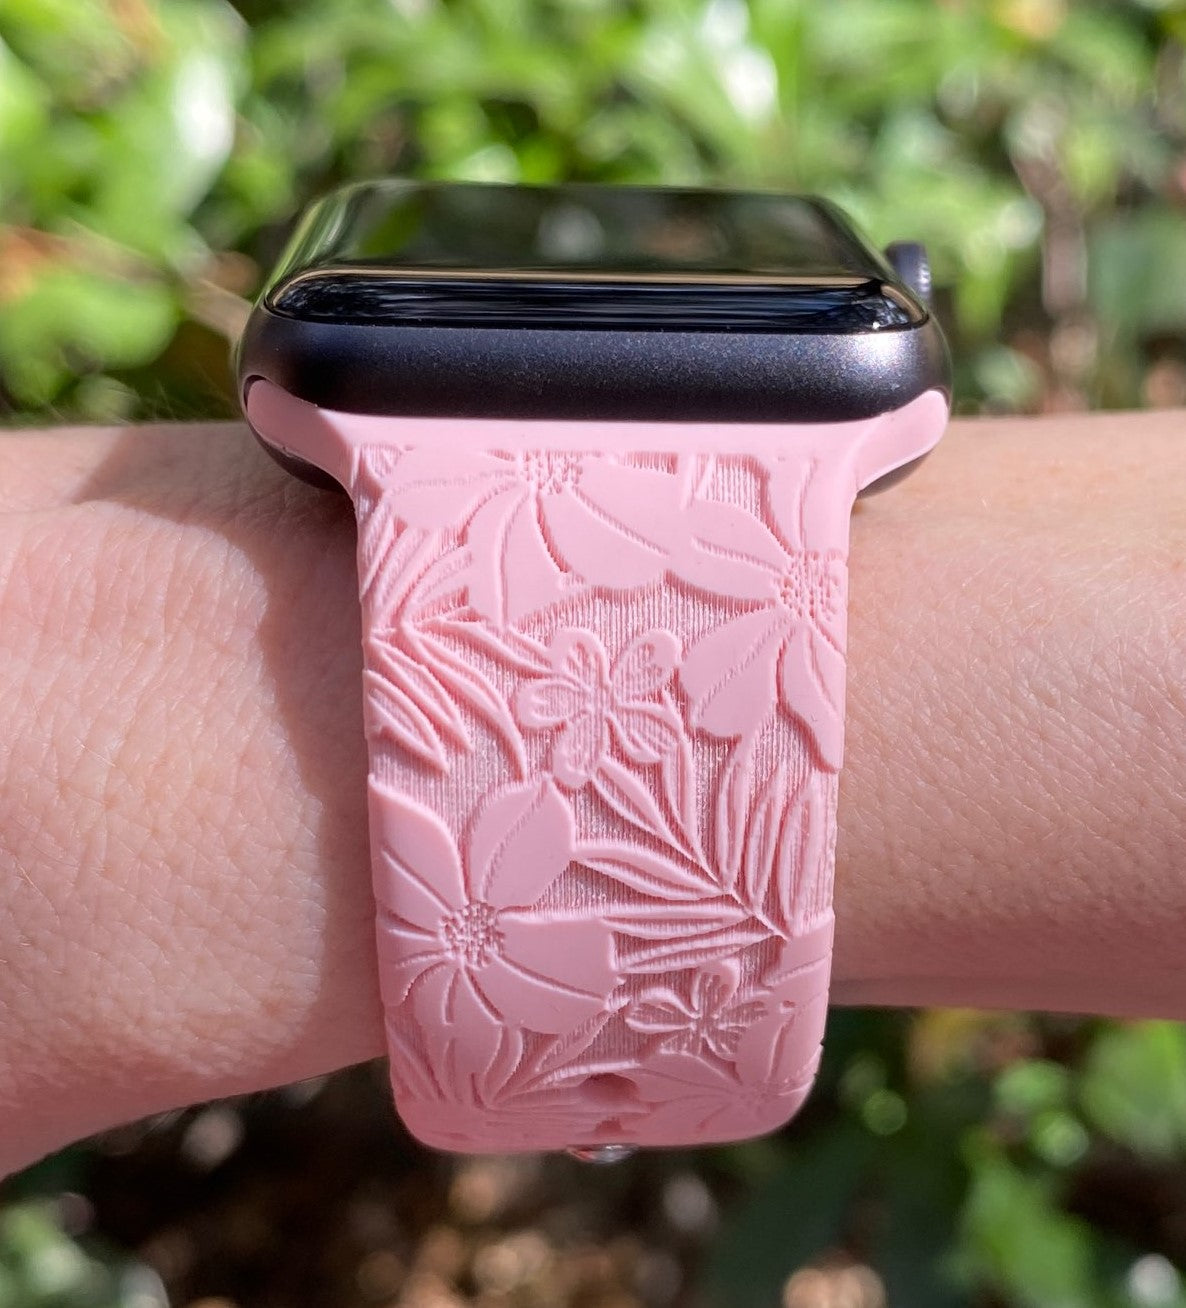 Pink Hibiscus Apple Watch Band